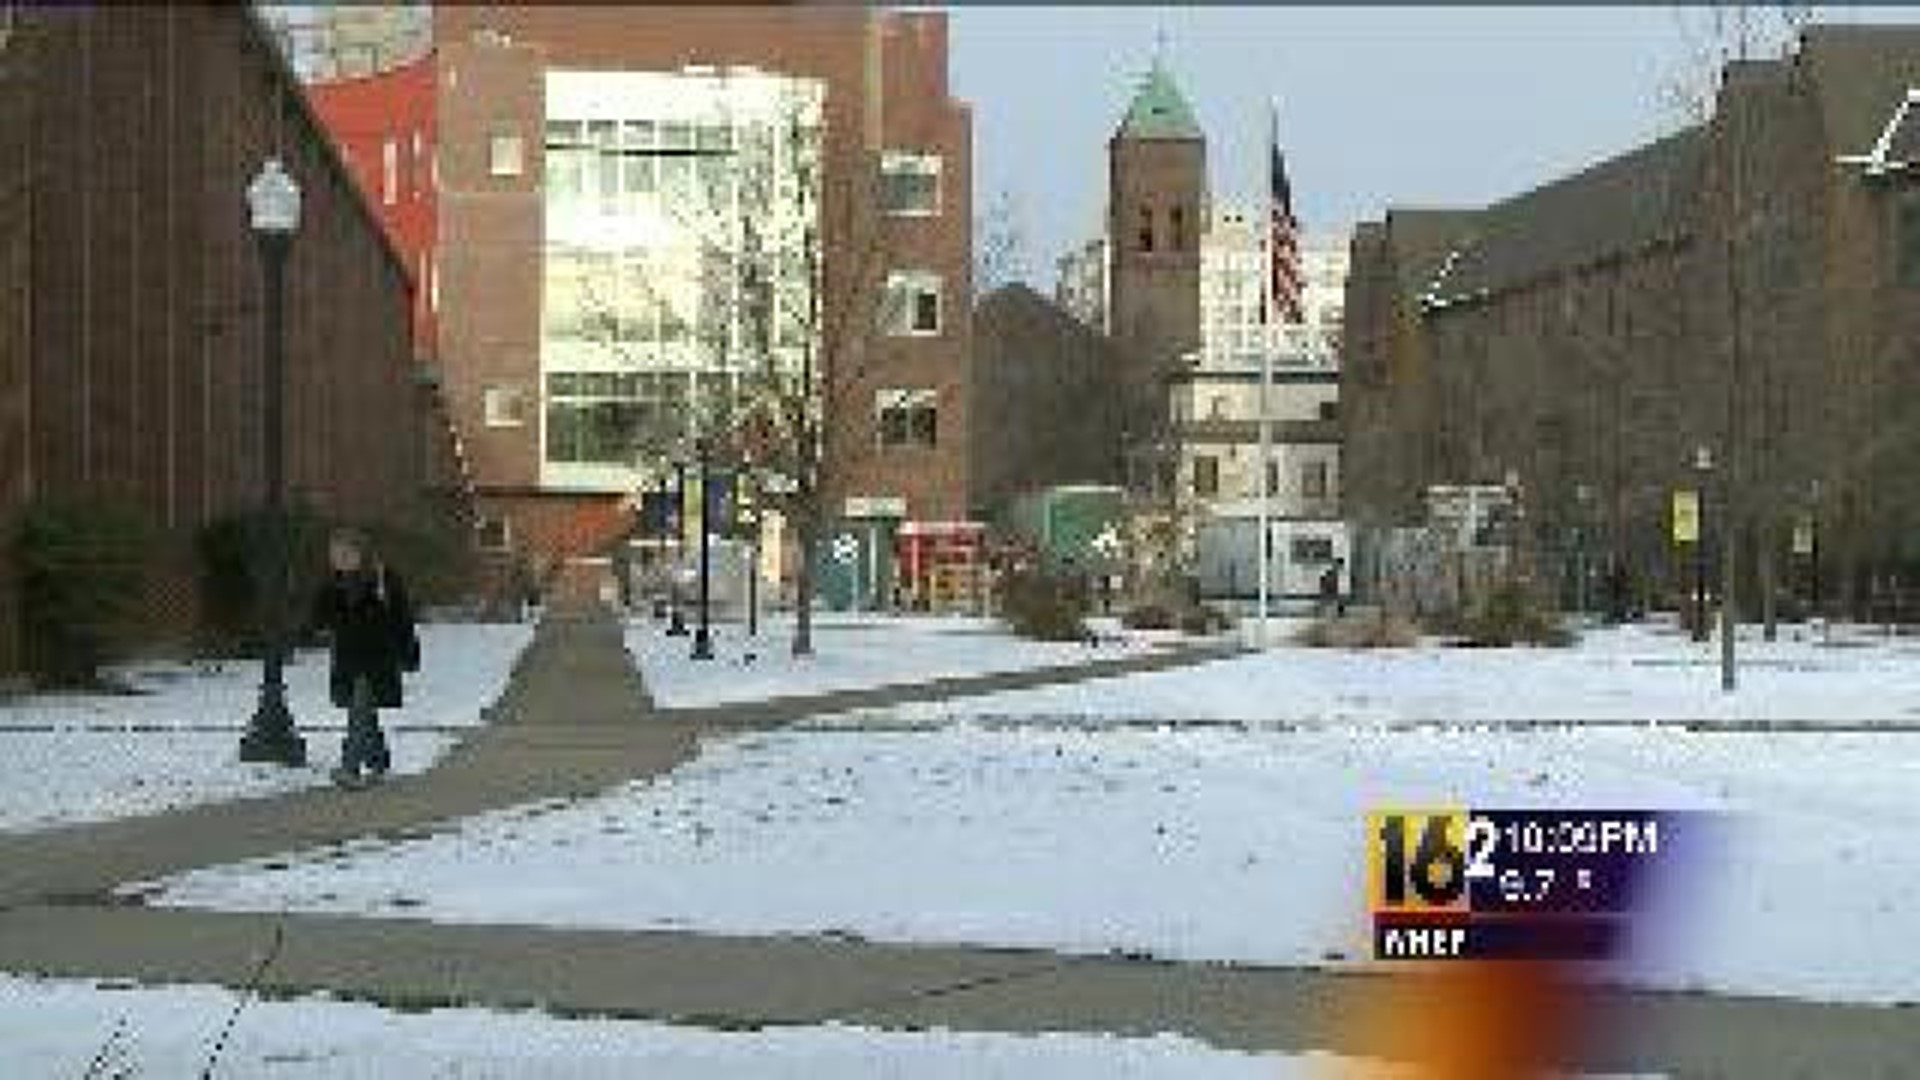 Wilkes University on Alert After Student Reportedly Robbed